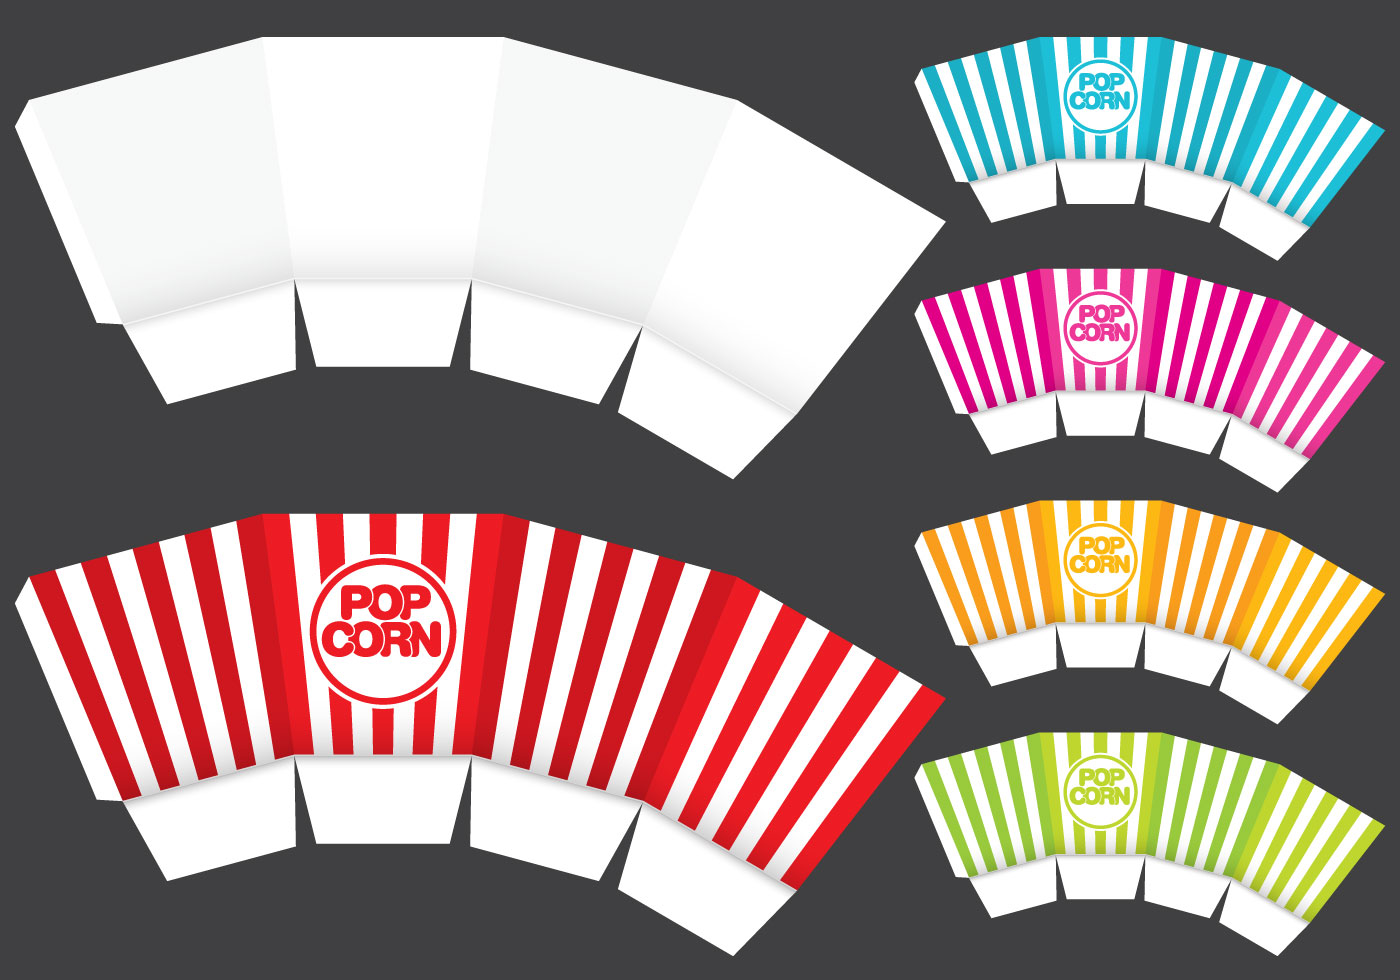 Popcorn Box Template Download Free Vector Art, Stock Graphics & Images